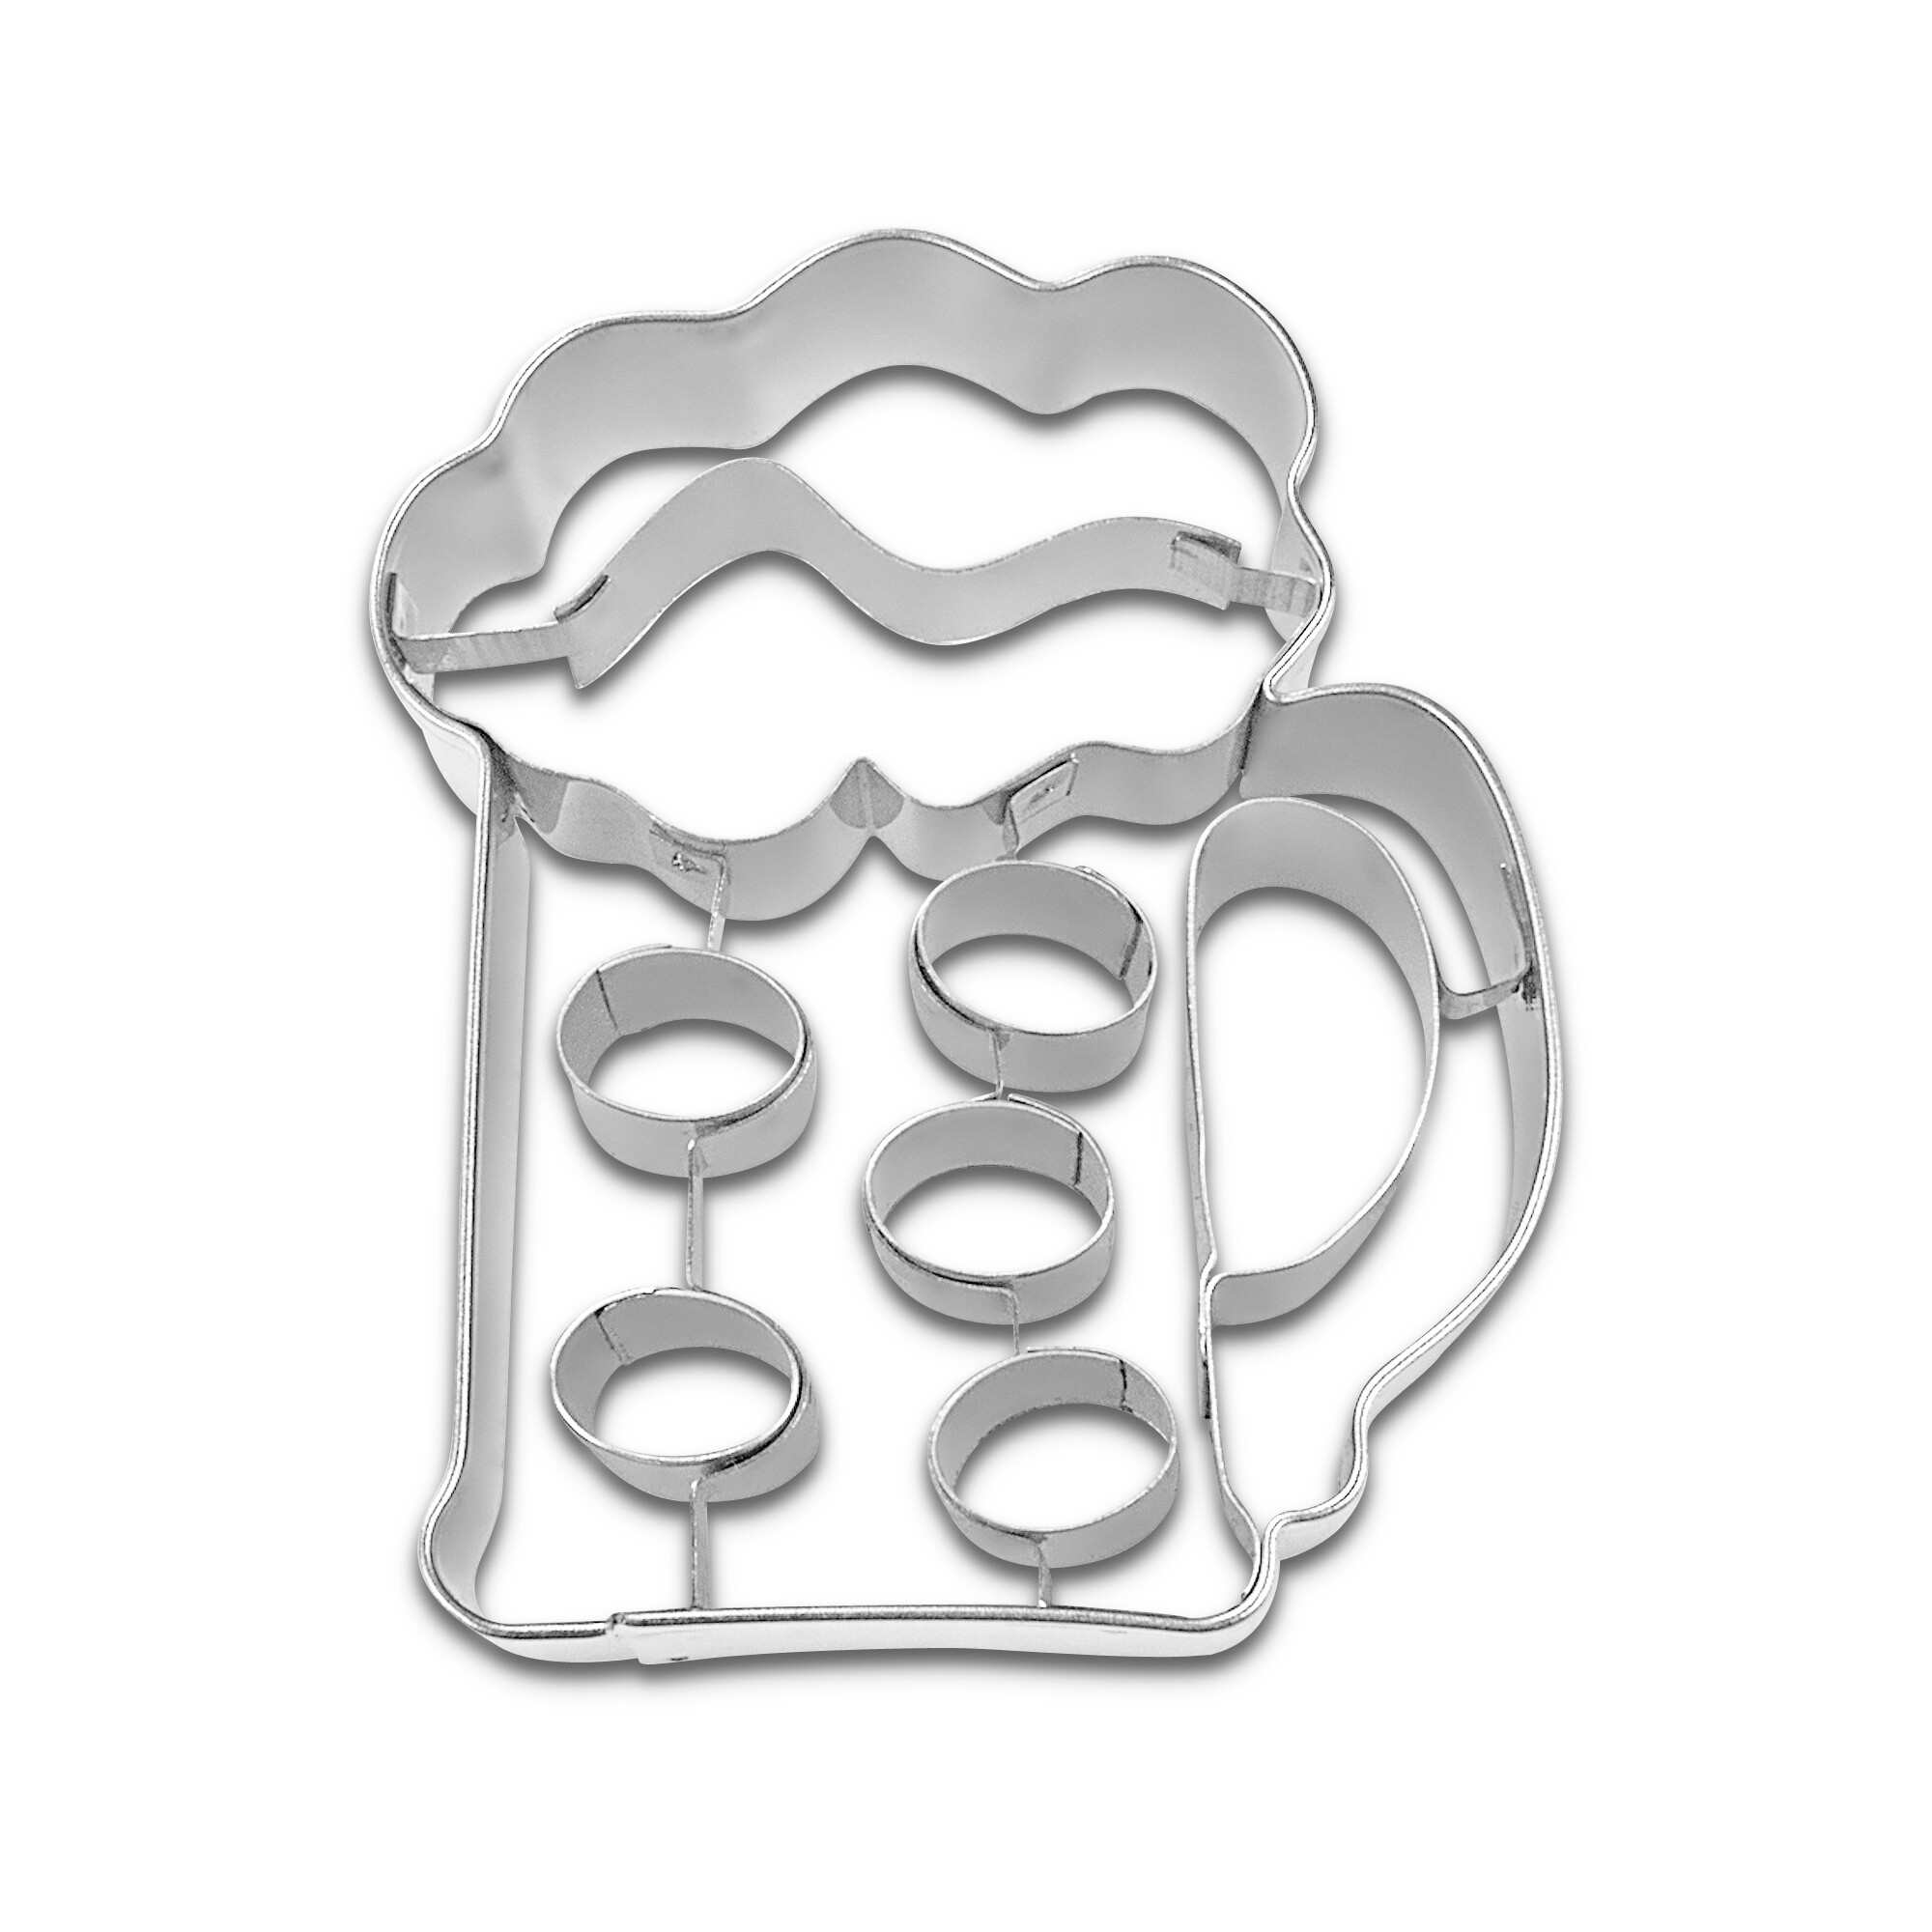 Cookie cutter with stamp – Beer mug